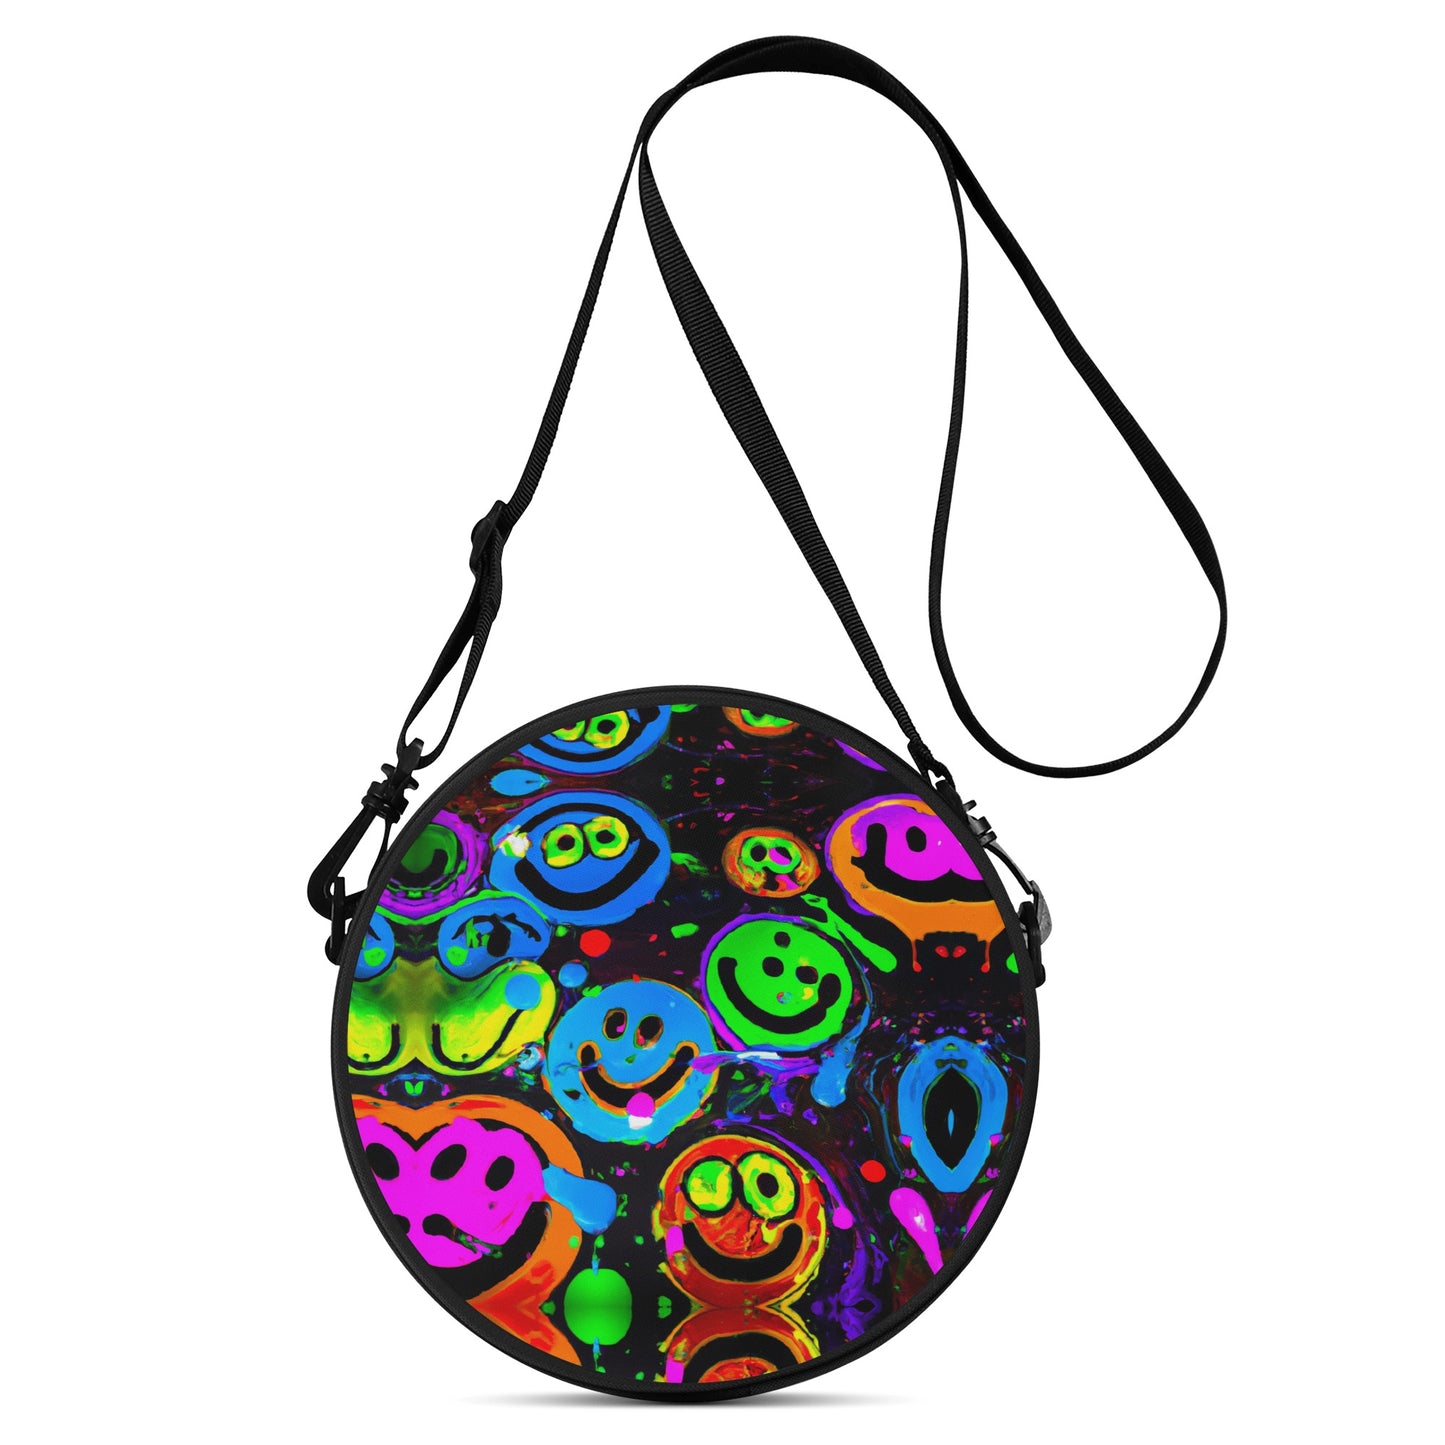 Neon Acid Smile Round Satchel Bag. This unique round satchel bag has a wild digitally printed design.  Featuring vibrant and unique visual of neon coloured smiley faces melting in acid.